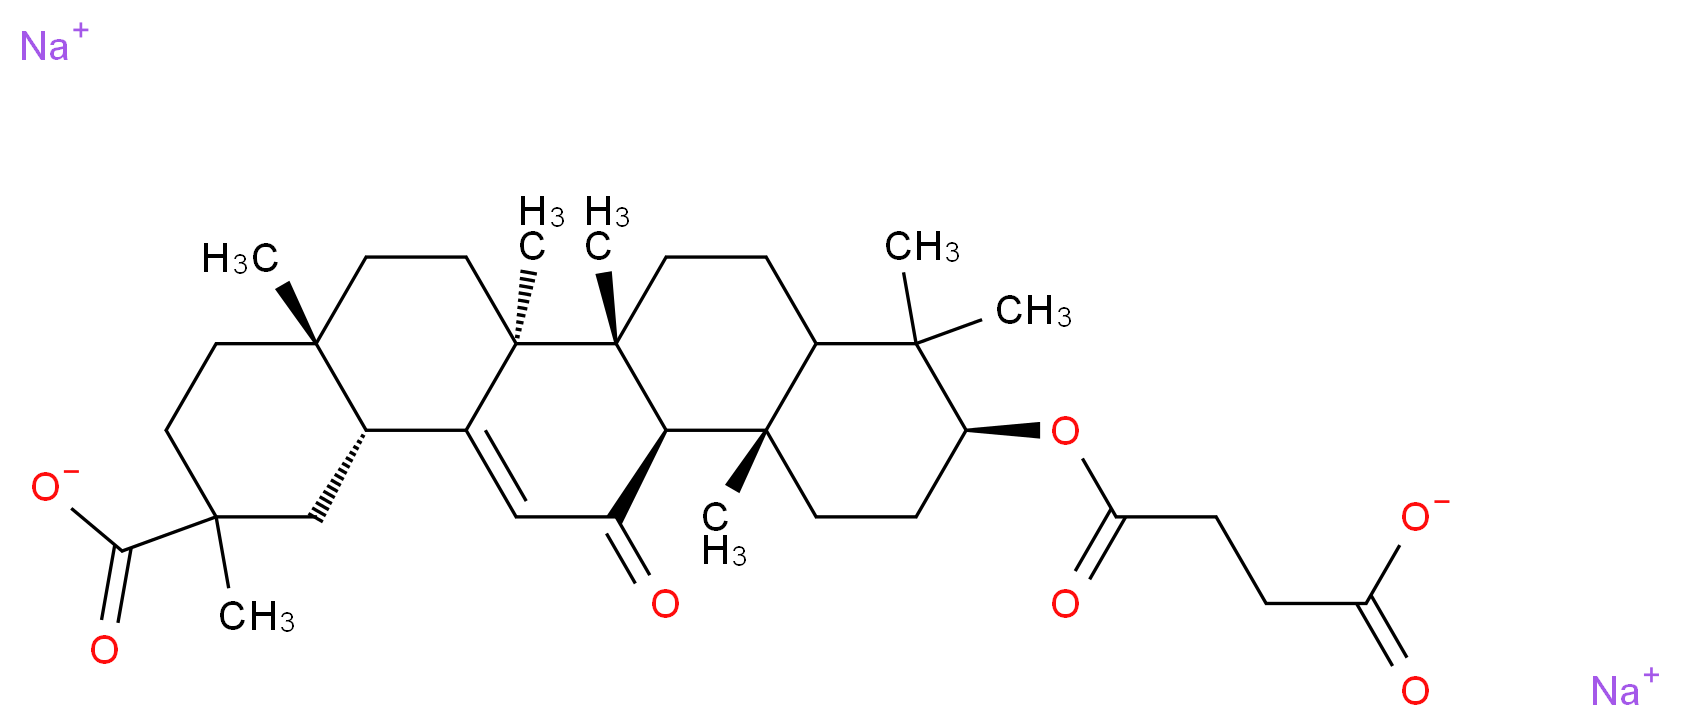 disodium (4aS,6aS,6bR,10S,12aS,12bR,14bR)-10-[(3-carboxylatopropanoyl)oxy]-2,4a,6a,6b,9,9,12a-heptamethyl-13-oxo-1,2,3,4,4a,5,6,6a,6b,7,8,8a,9,10,11,12,12a,12b,13,14b-icosahydropicene-2-carboxylate_分子结构_CAS_7421-40-1